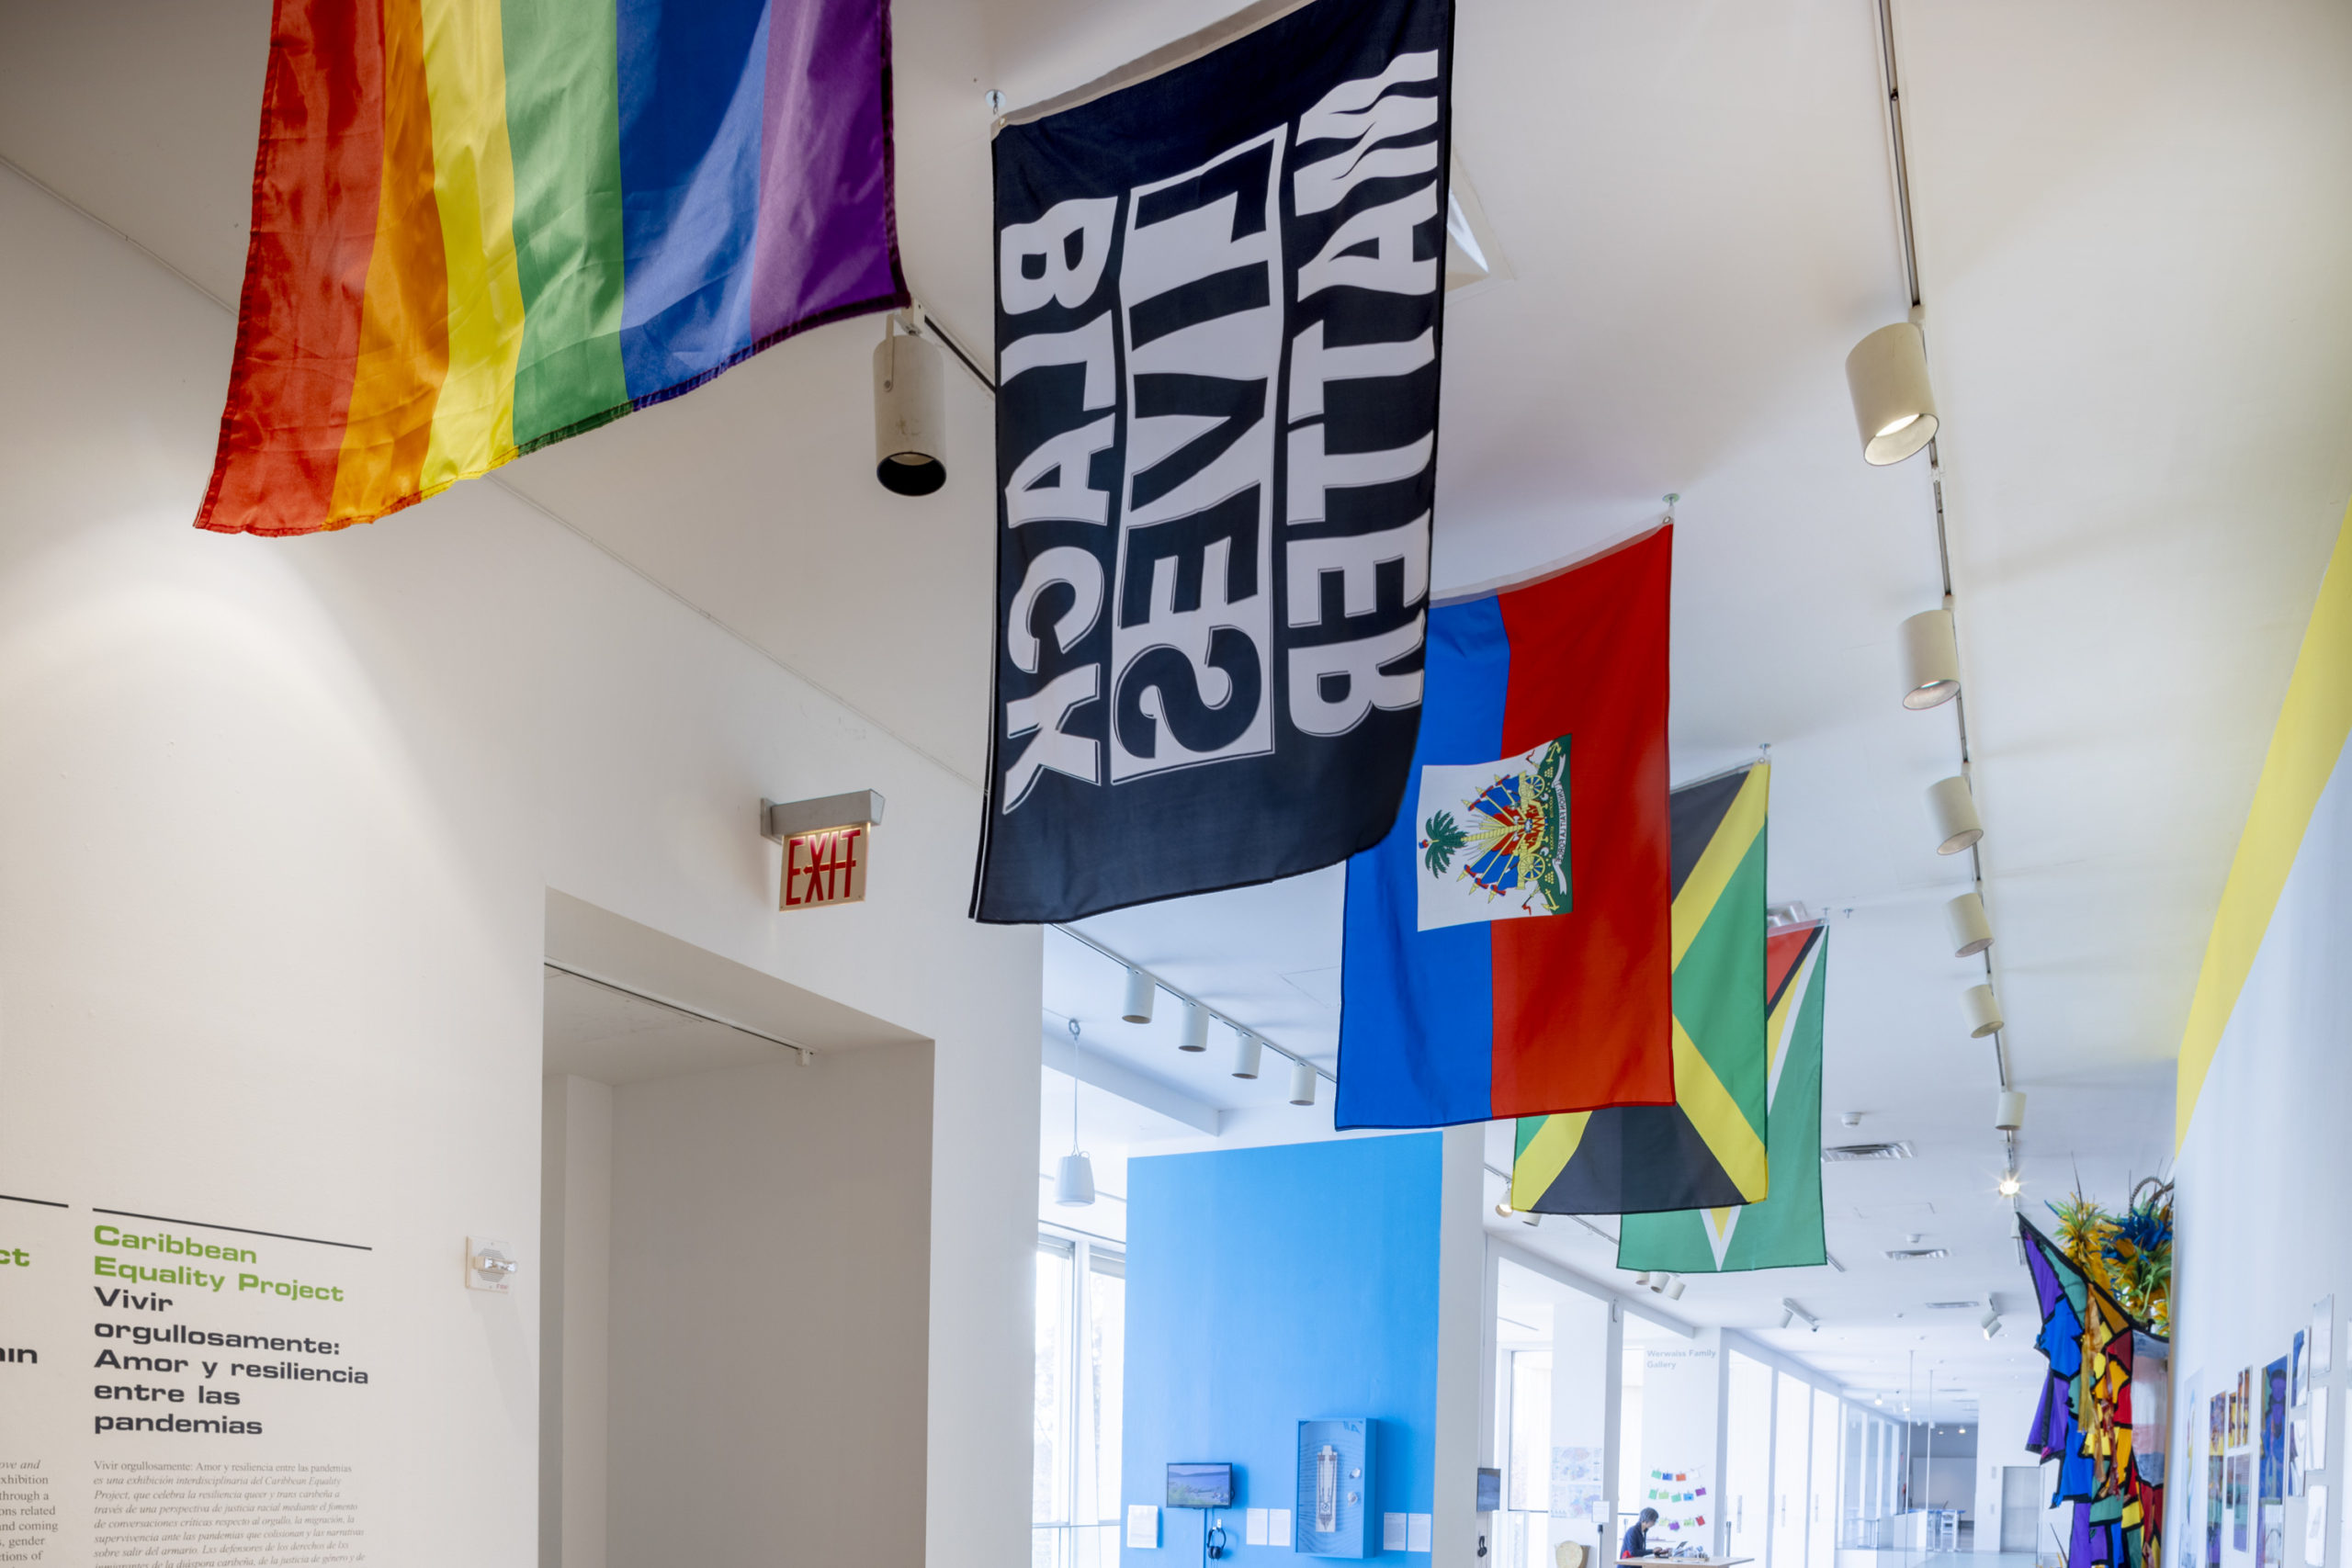 A exhibition ceiling view of flags that have been installed in a row. From left to right is an inclusive pride flag, a black lives matter flag, a Haitian flag, a Jamaican flag and a Guyanese flag.